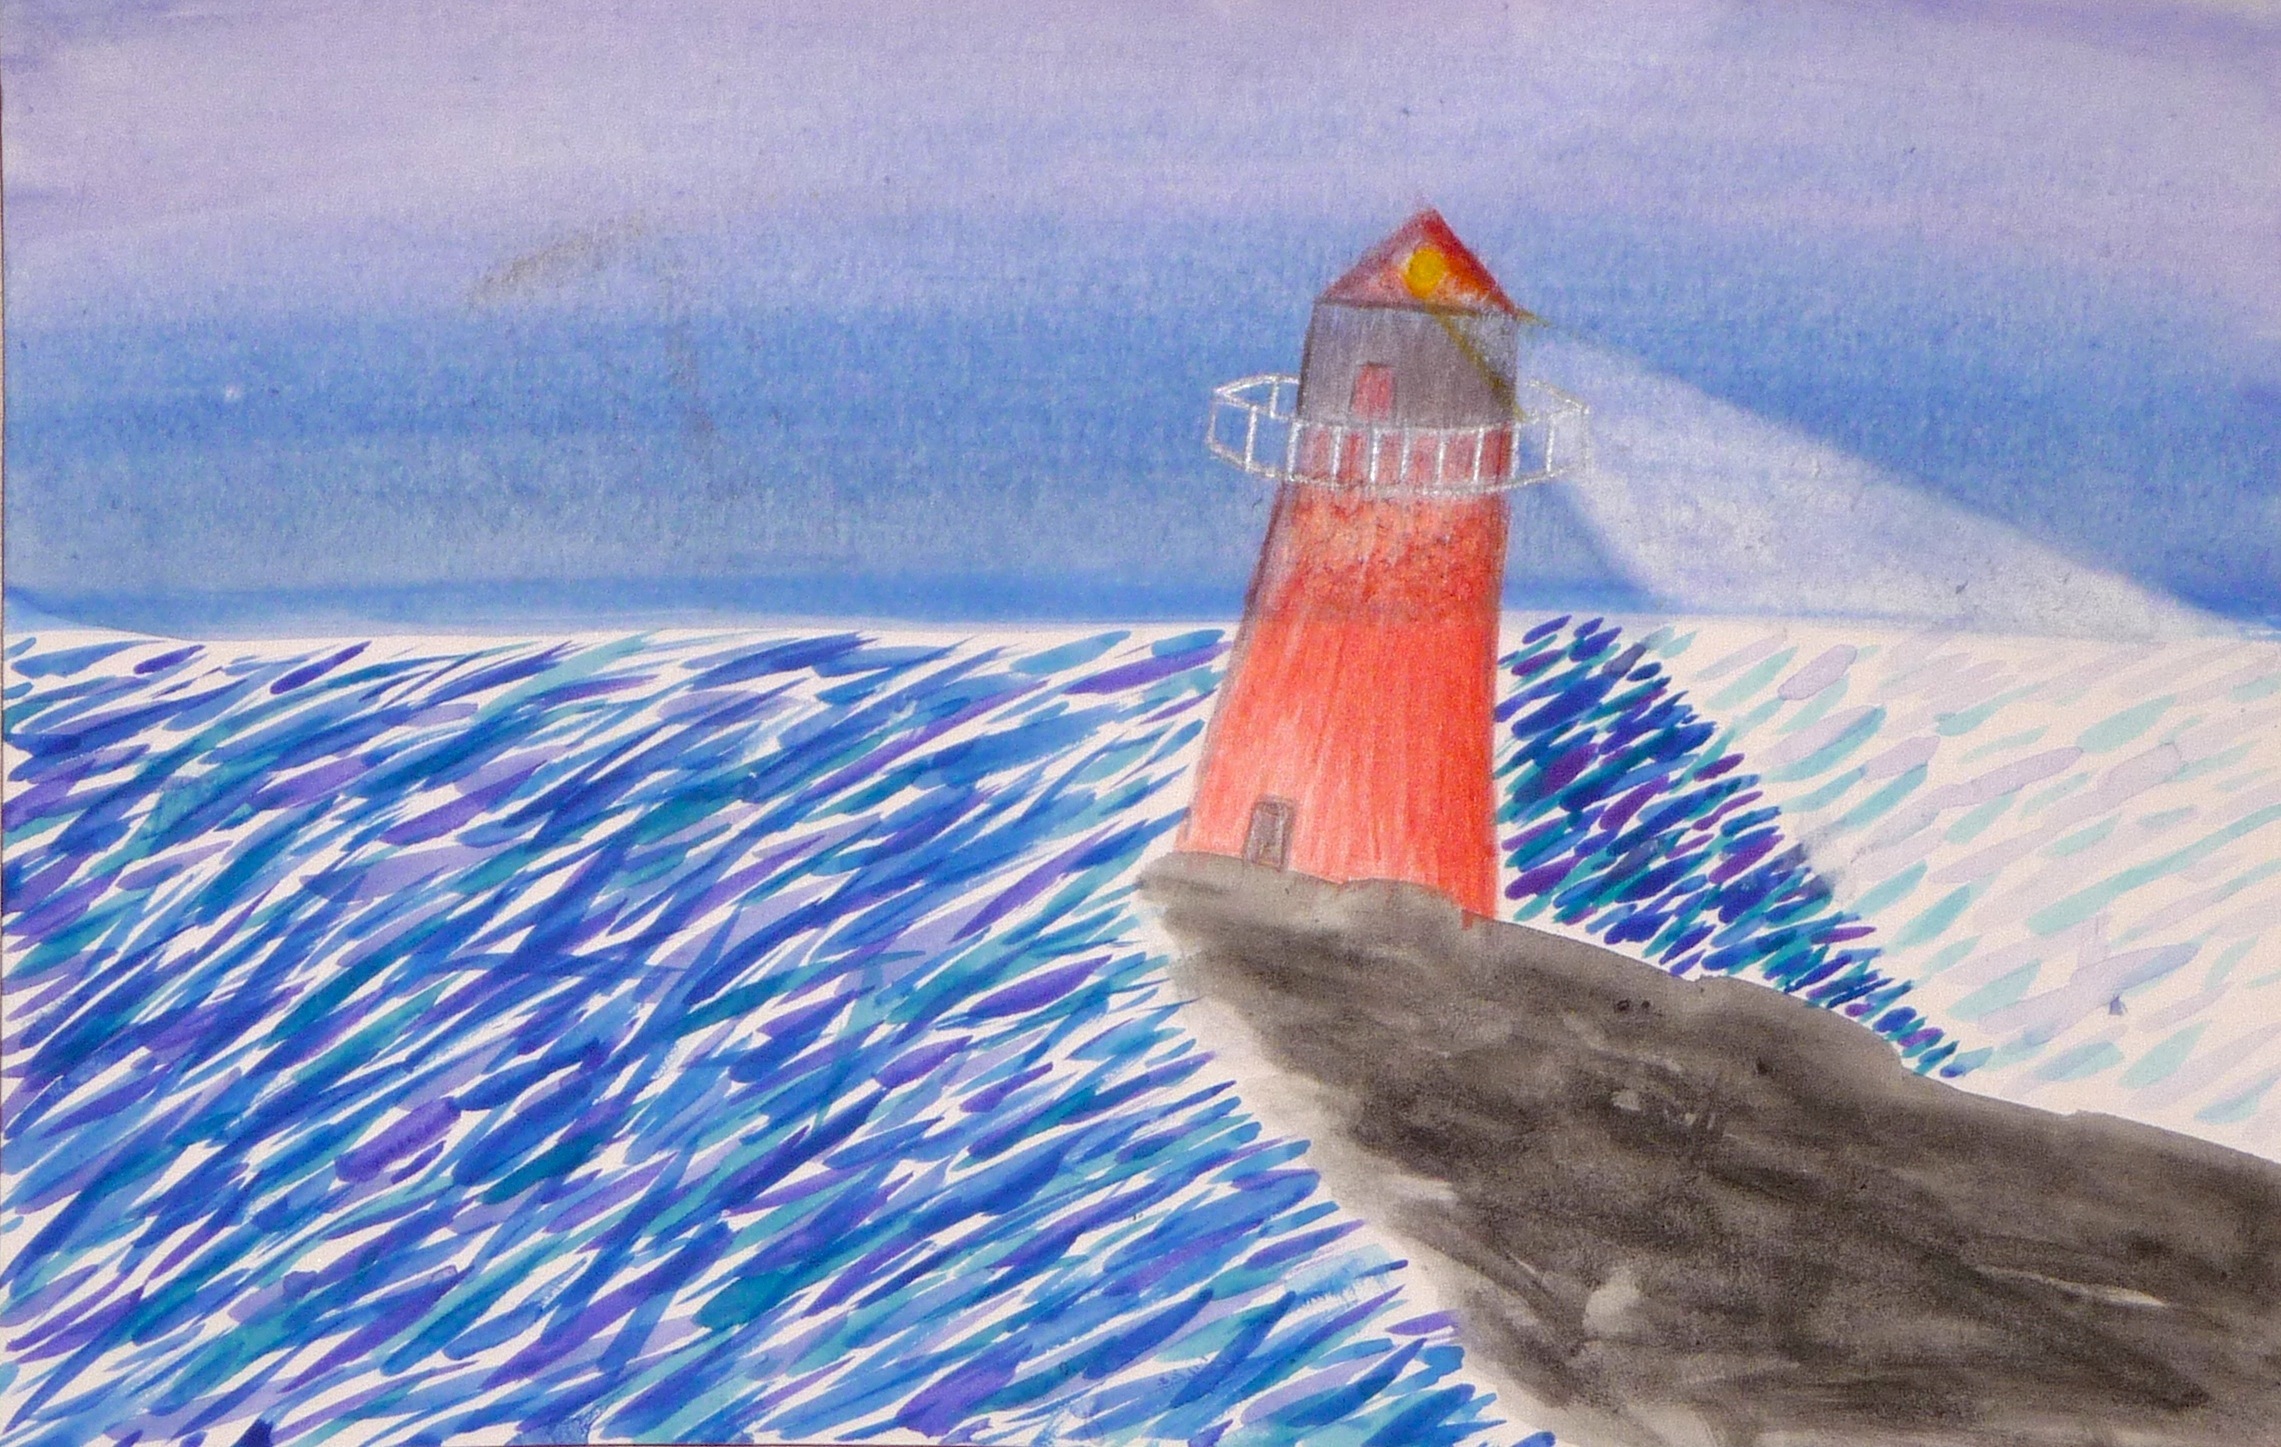 View Image Details Lighthouse in watercolor by Isaac